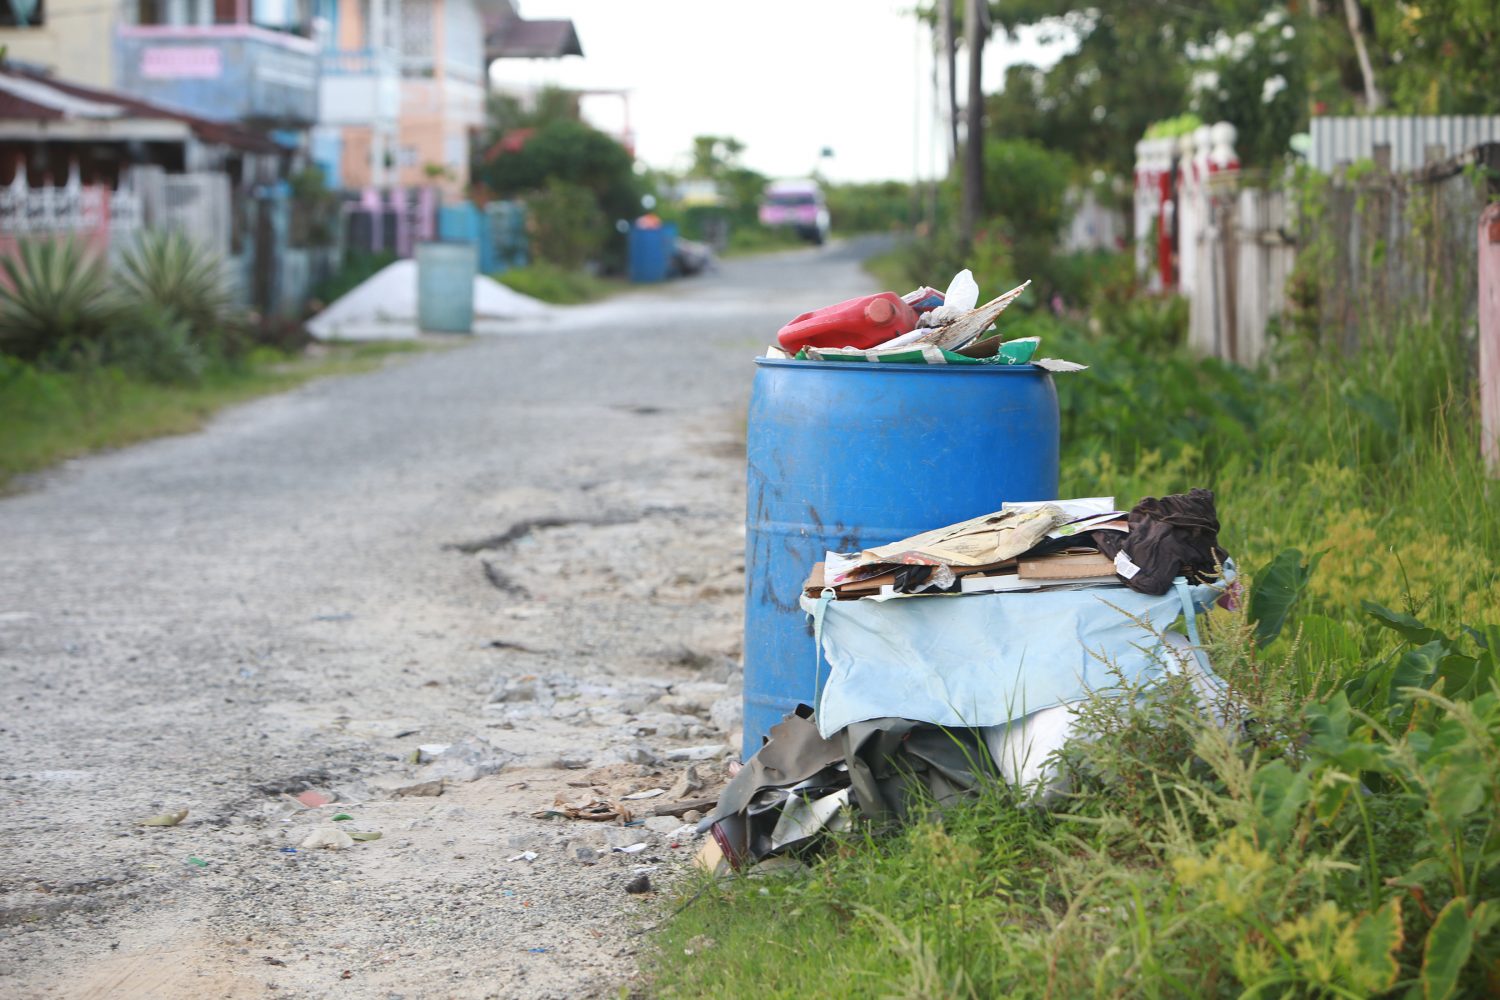 Residents in Agricola complained yesterday that their garbage has not been picked up since last week